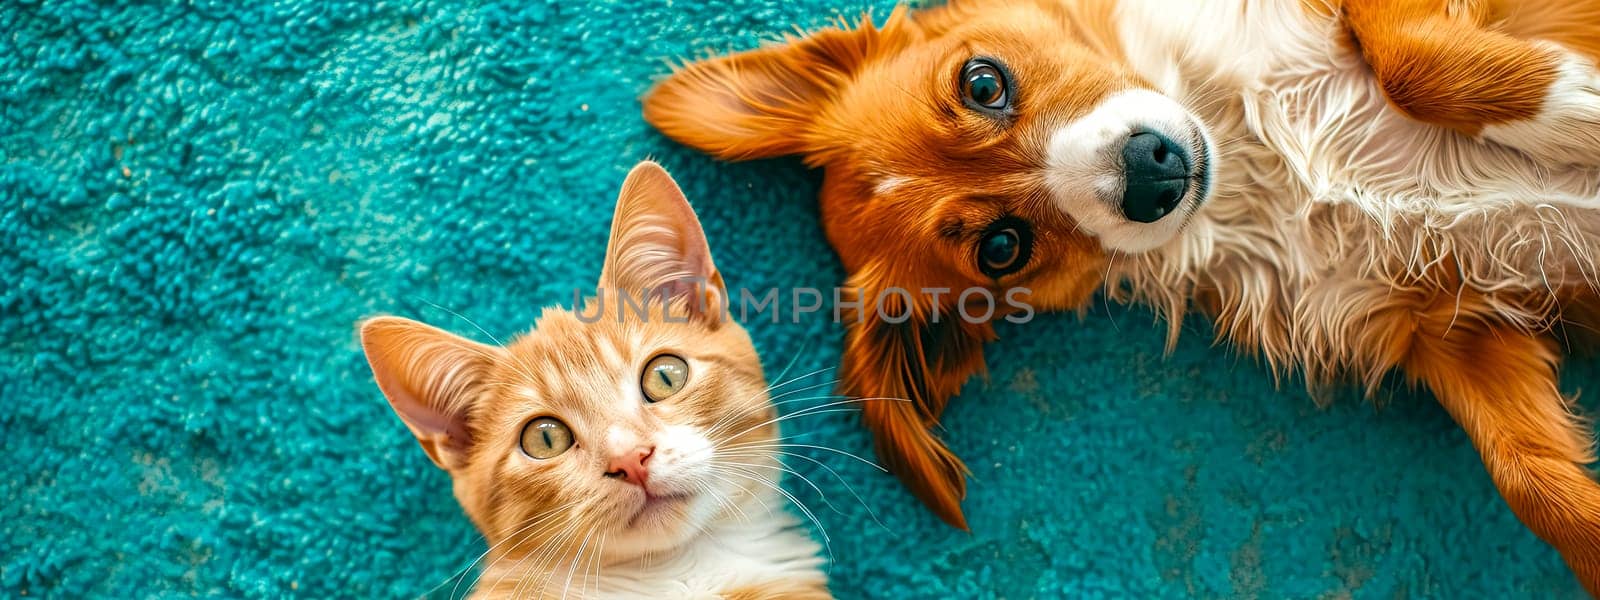 Cat and dog companions share a moment on a turquoise carpet. copy space by Edophoto